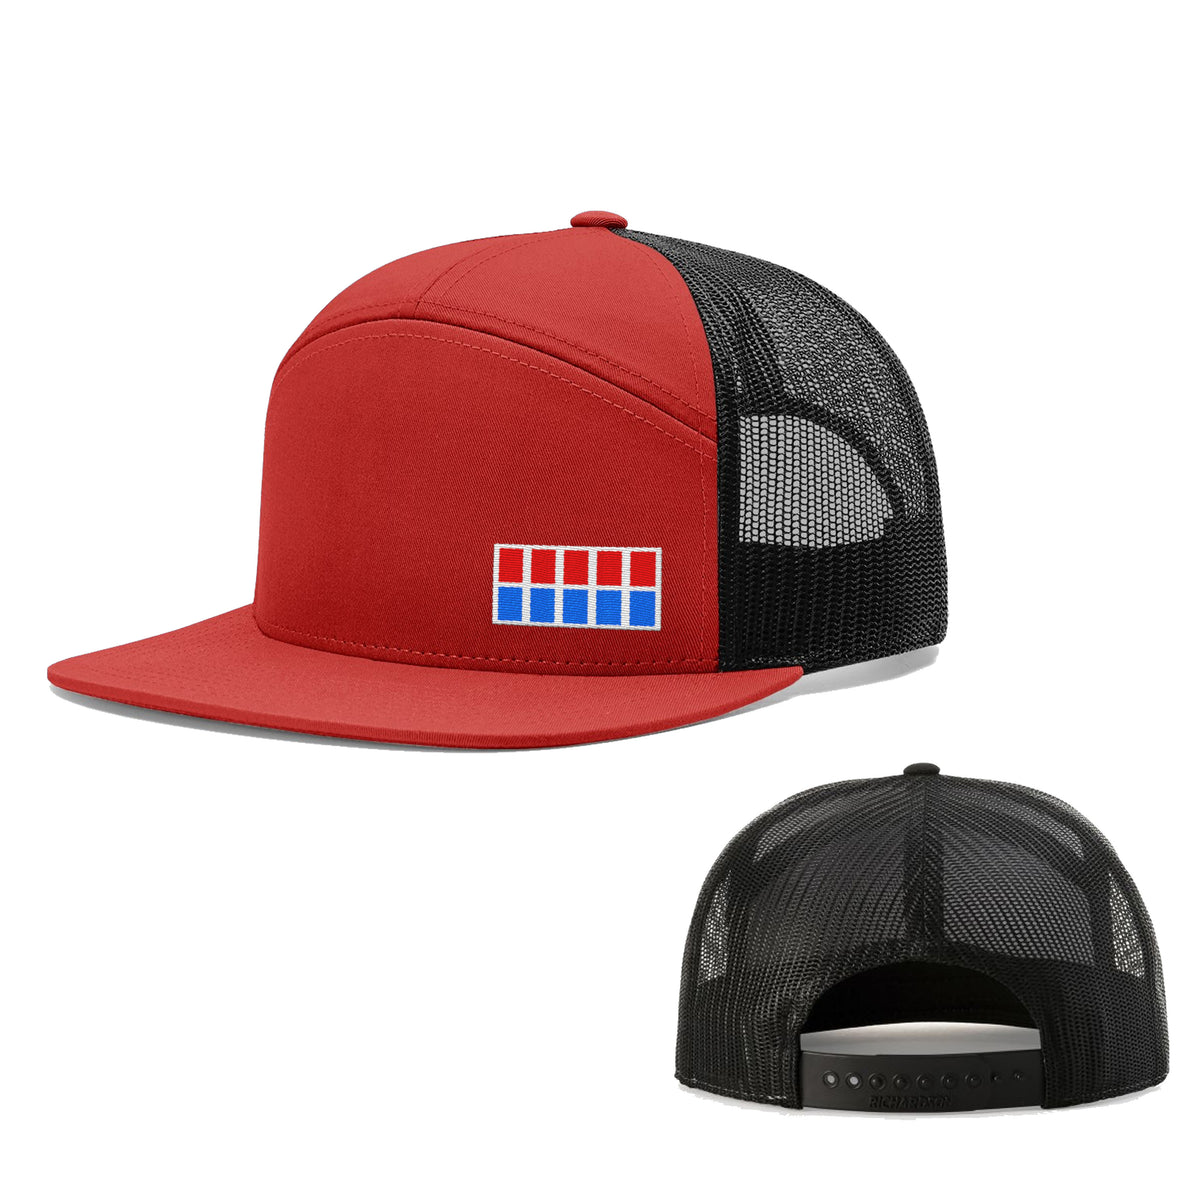 Imperial Officer 7 Panel Hats